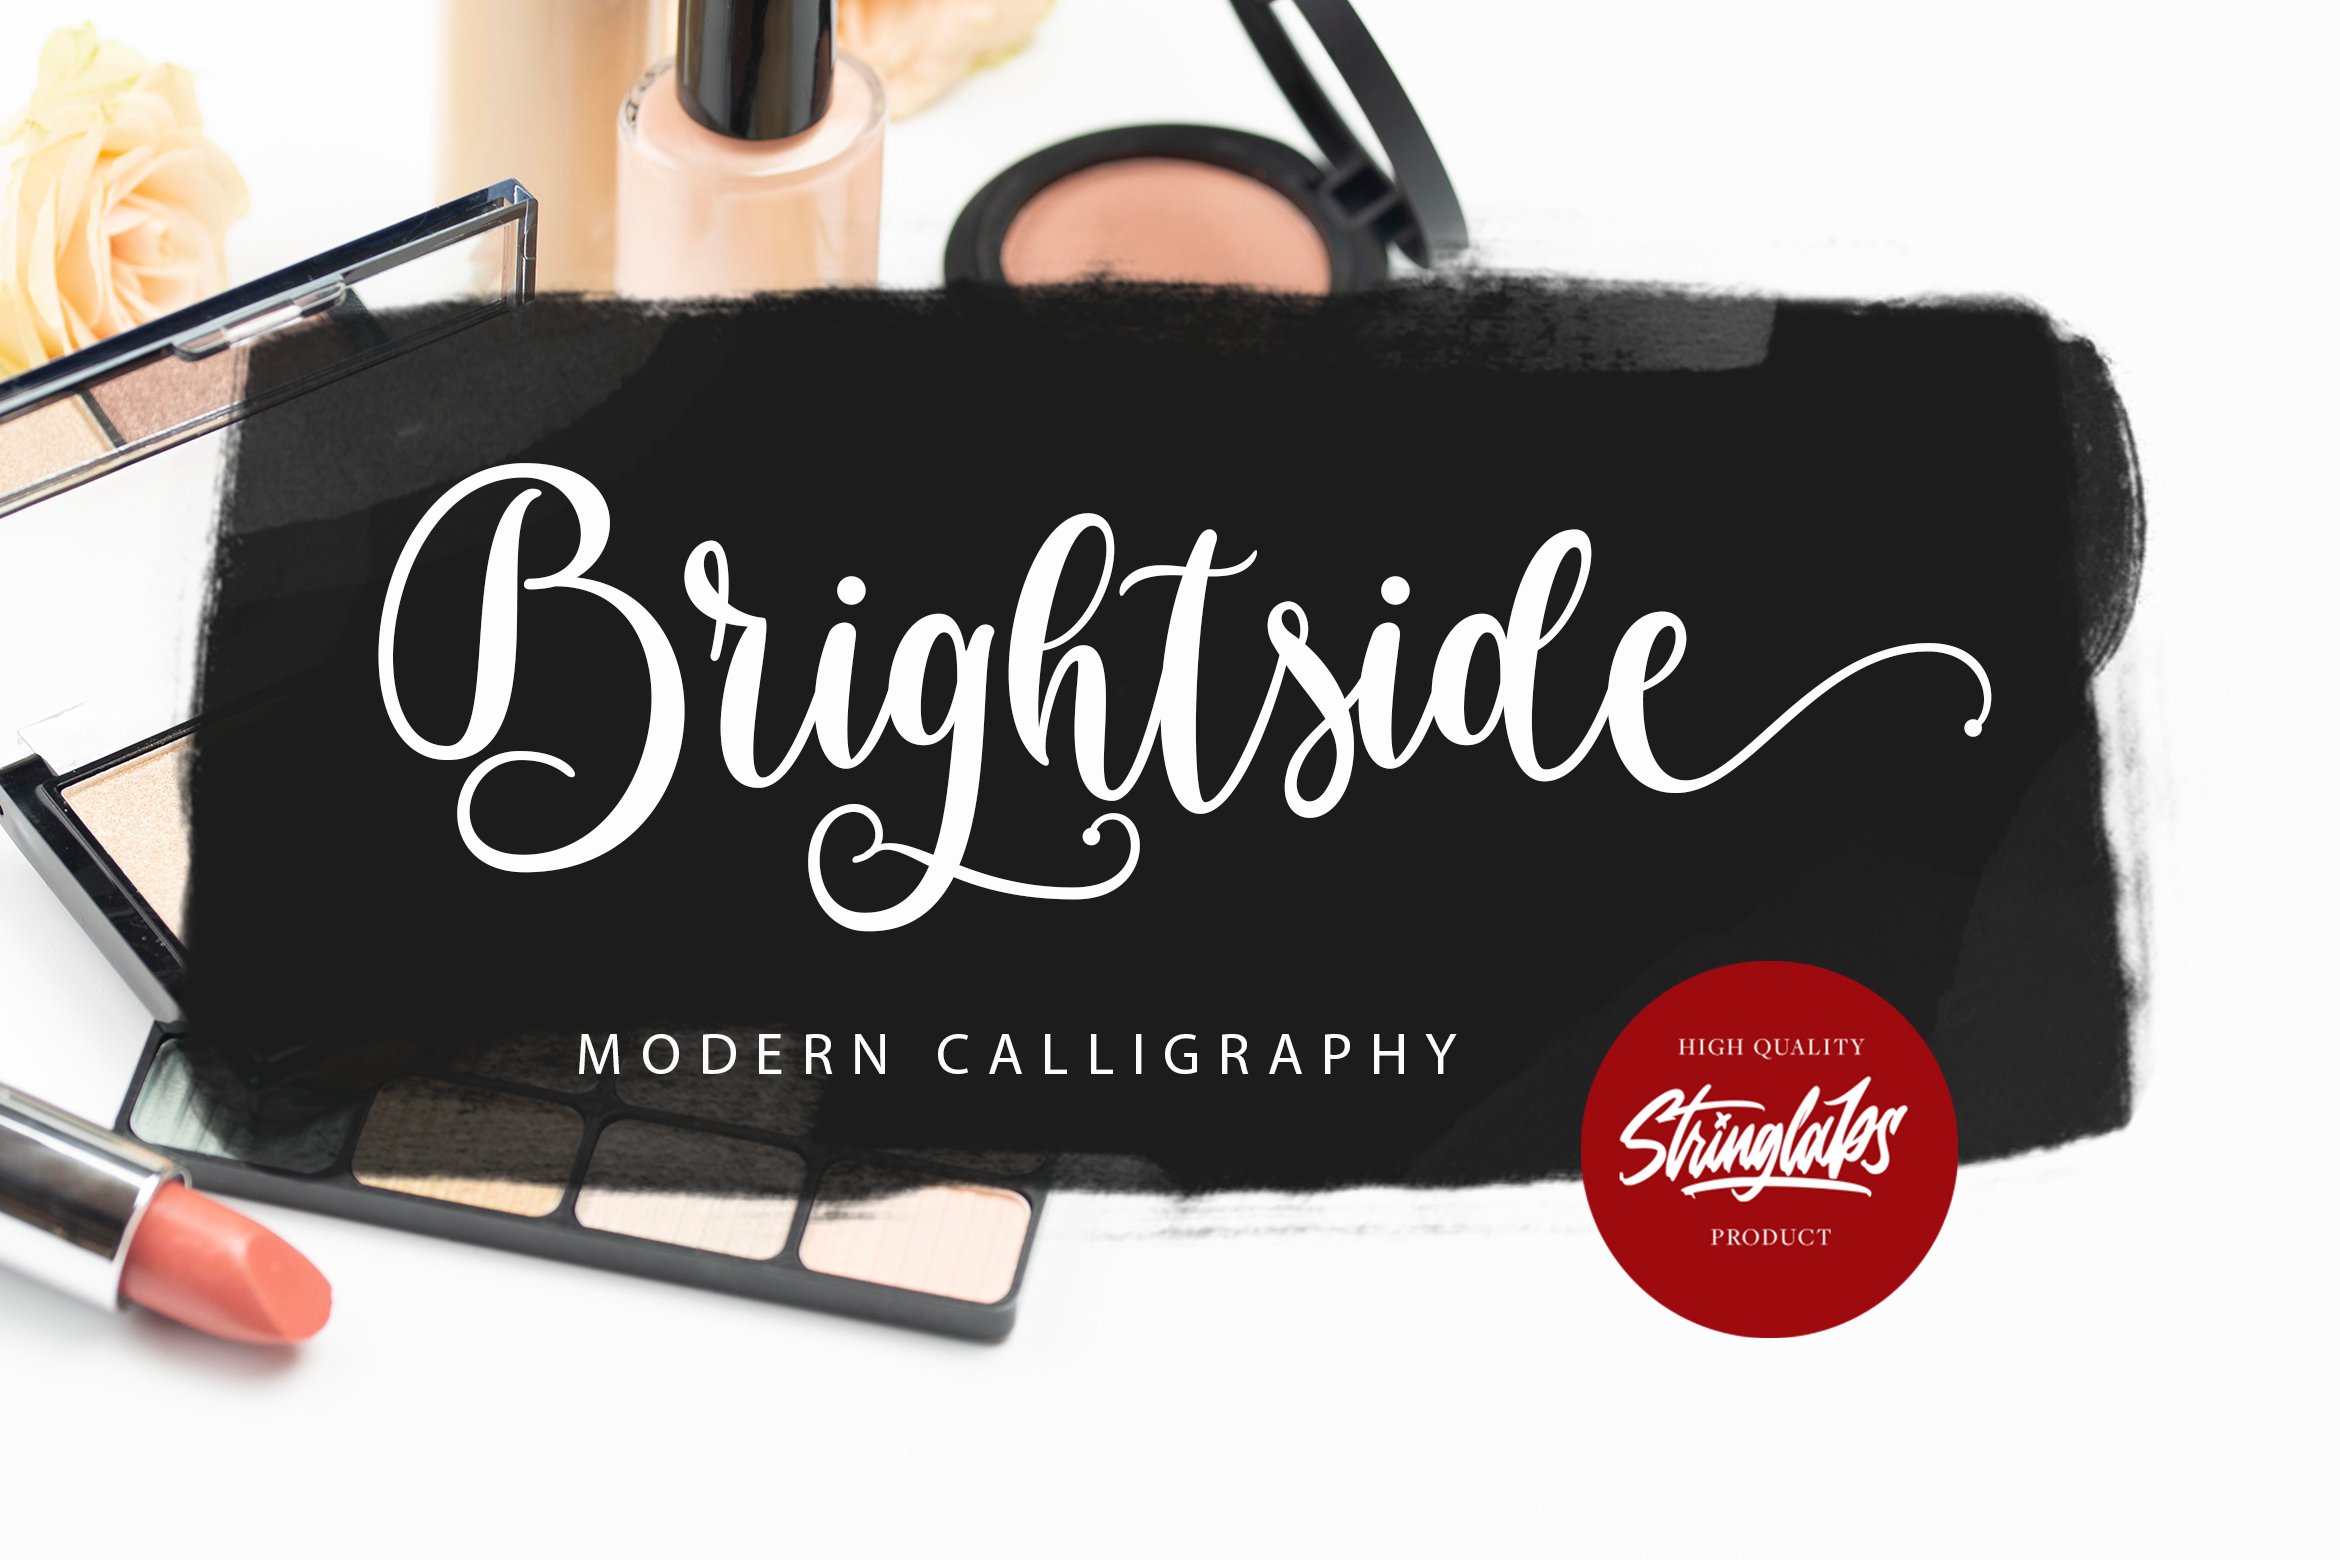 Brightside - Modern Calligraphy Font cover image.